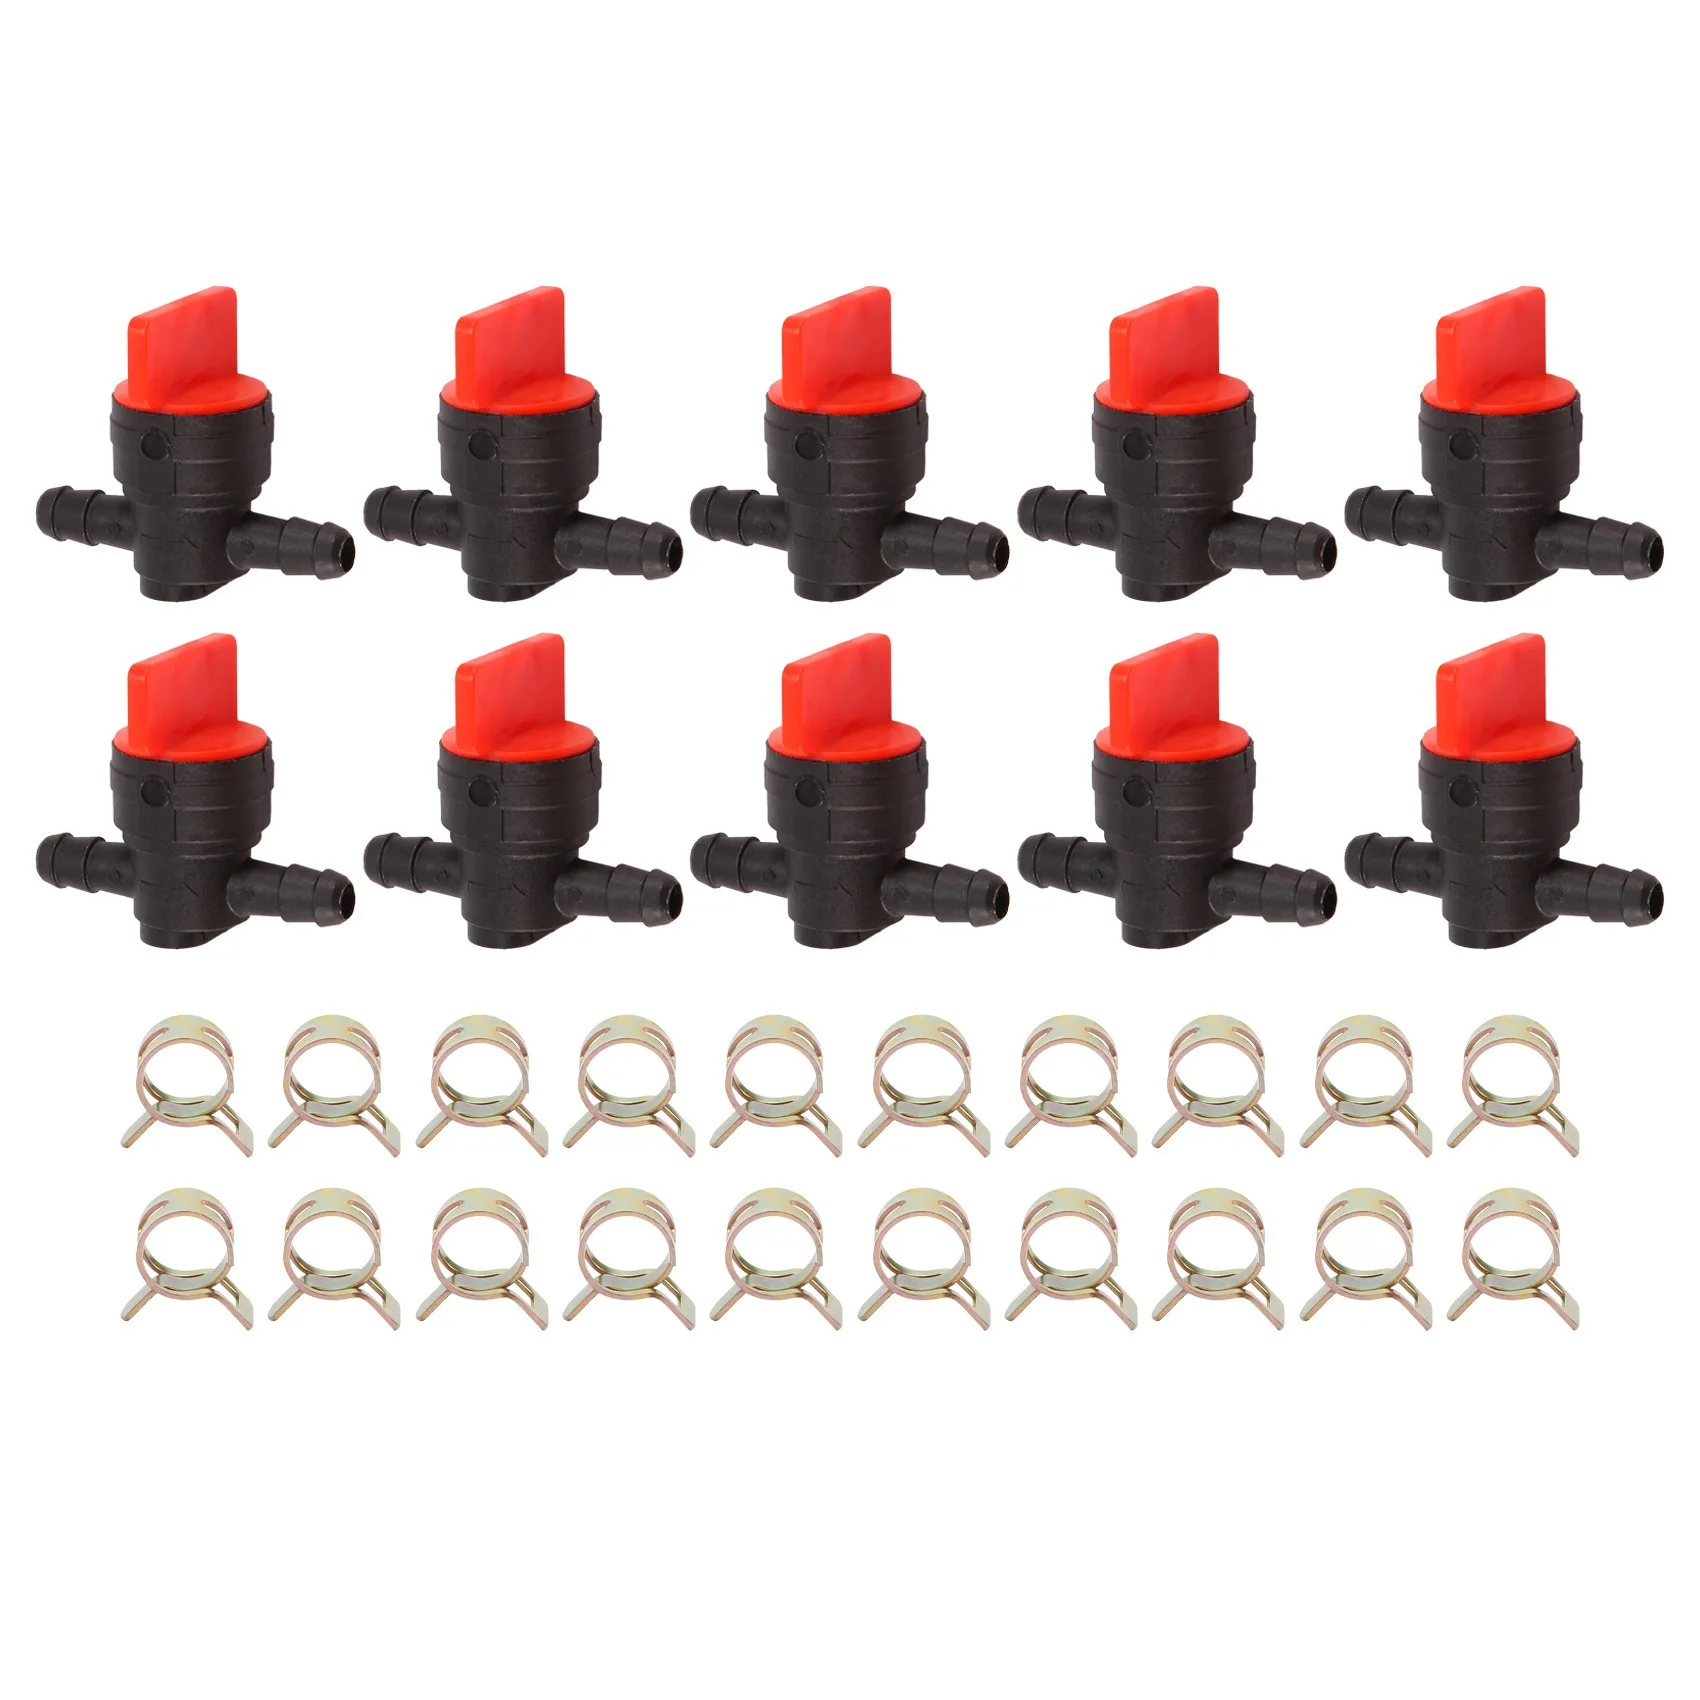 

10PCS 494768 698183 Fuel Shut Off Valve with Clamp for 1/4 inch Fuel Line Briggs & Stratton Murray Toro Lawn Tractor